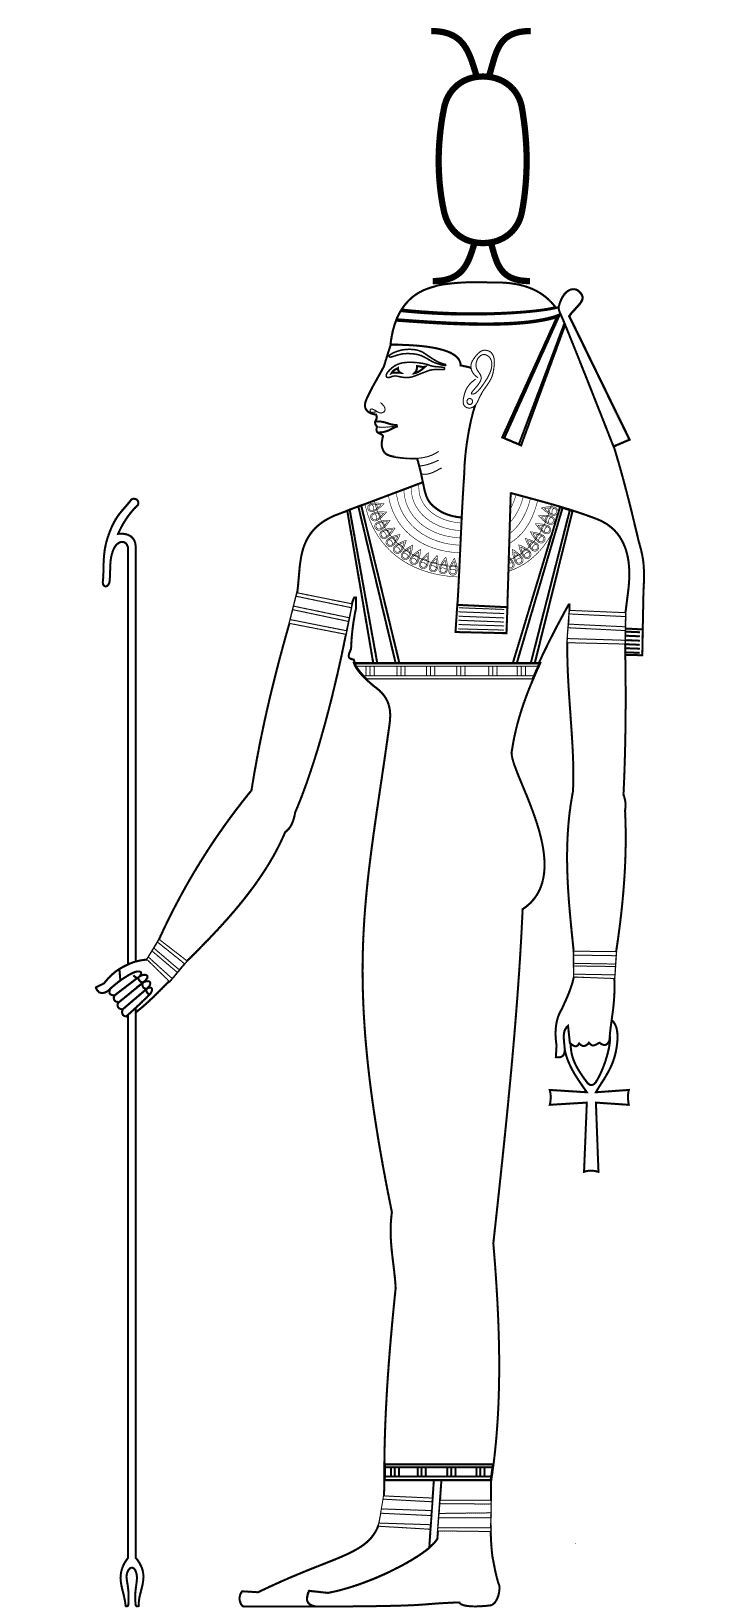 Neith coloring page - ColouringPages